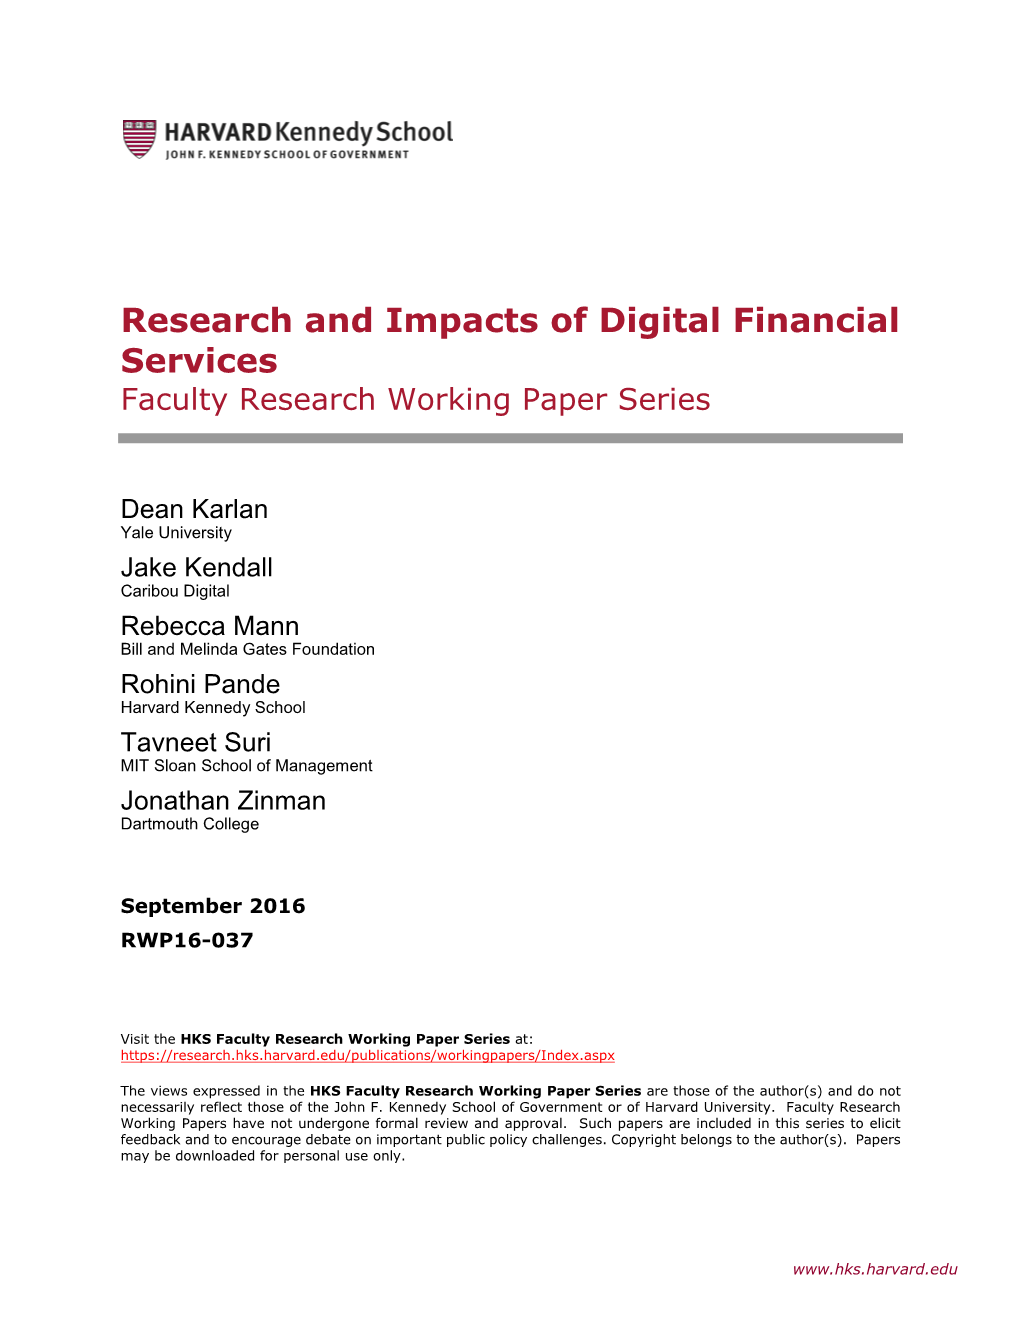 Research and Impacts of Digital Financial Services Faculty Research Working Paper Series